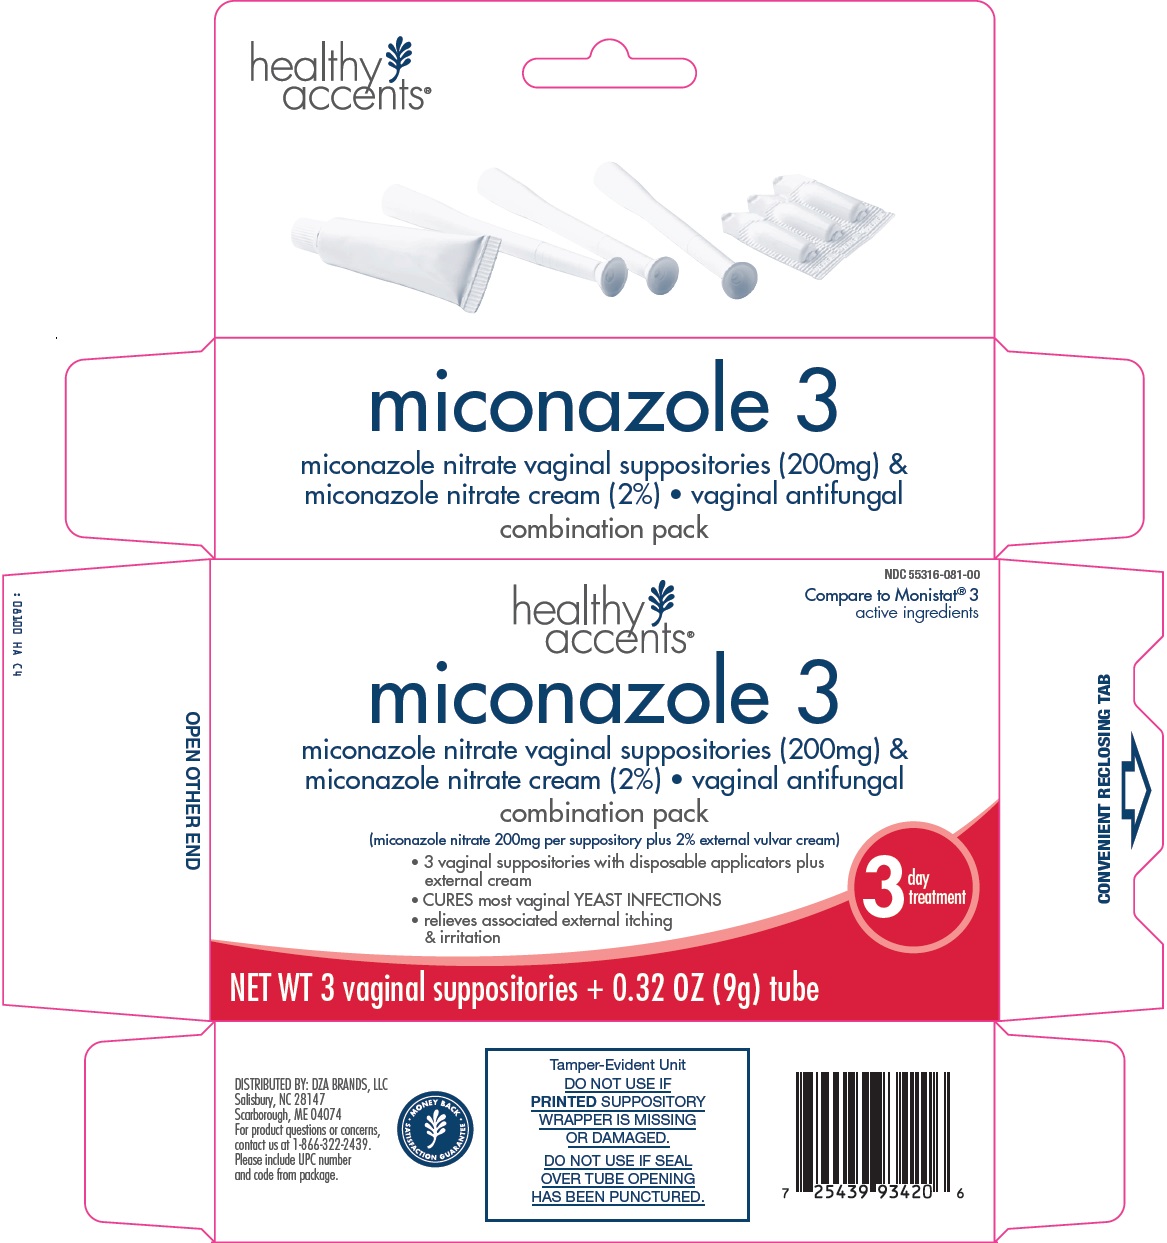 Healthy Accents Miconazole 3 image 1